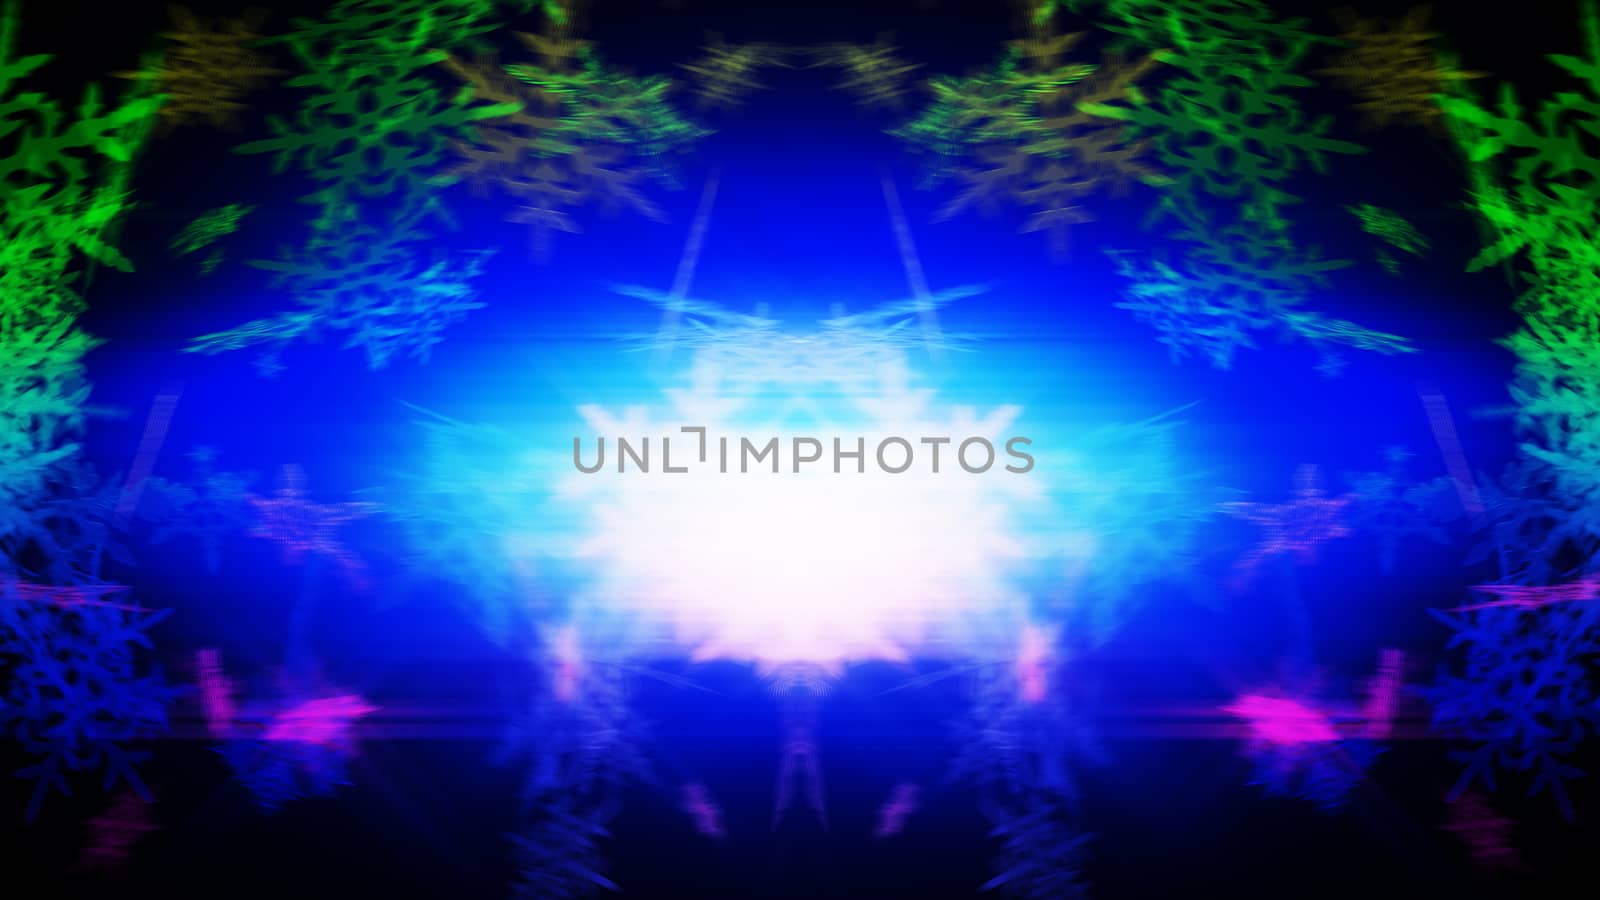 3d rendeing of winter snowflakes in motion and colorful background and a flash on the center of illustration for some text.